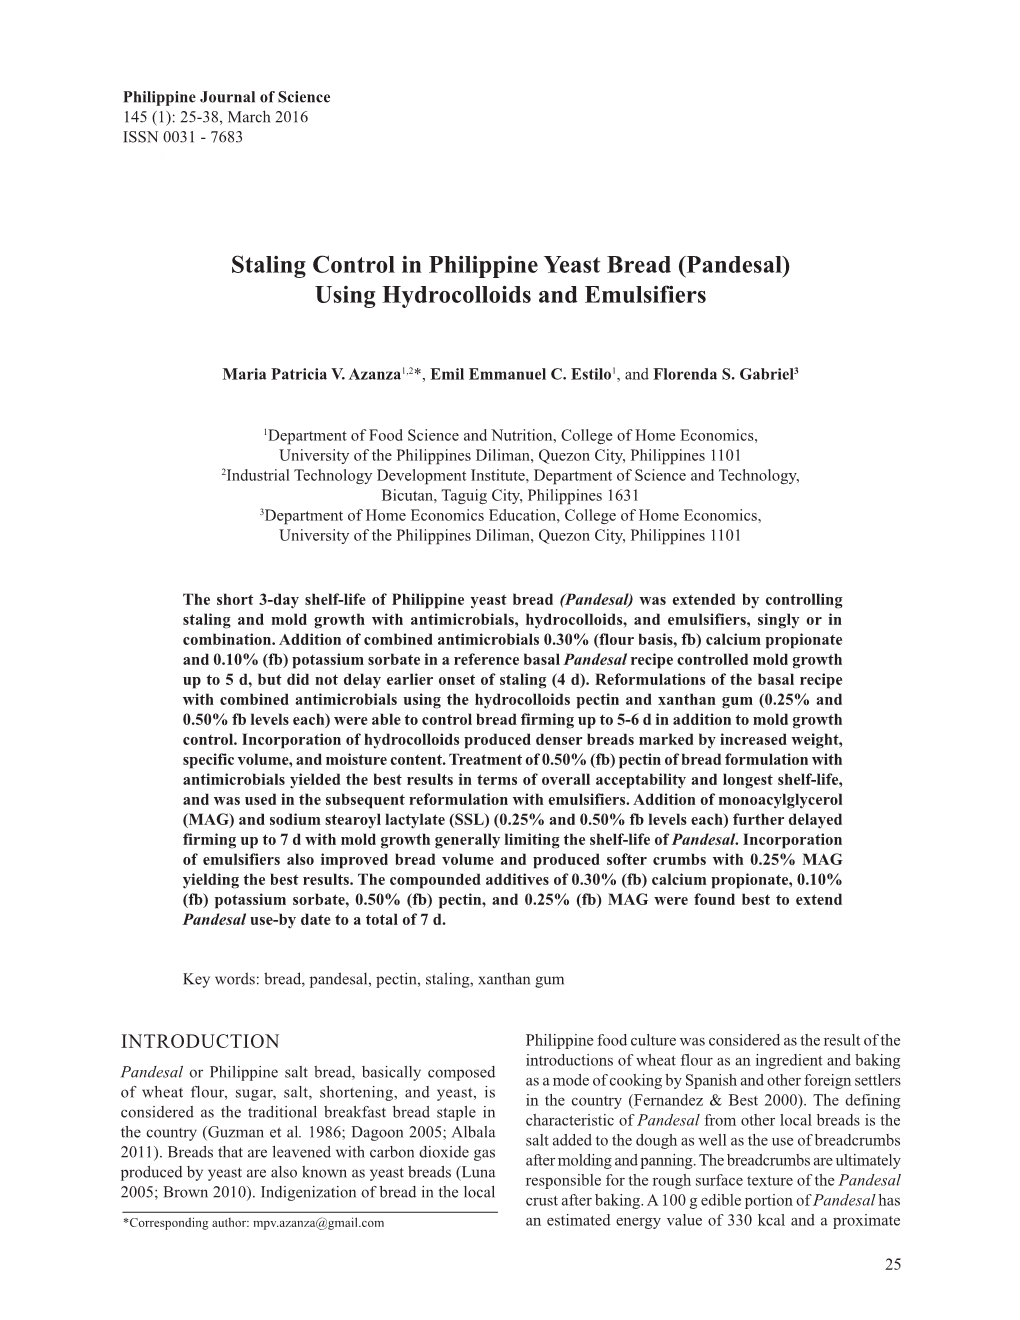 Staling Control in Philippine Yeast Bread (Pandesal) Using Hydrocolloids and Emulsifiers